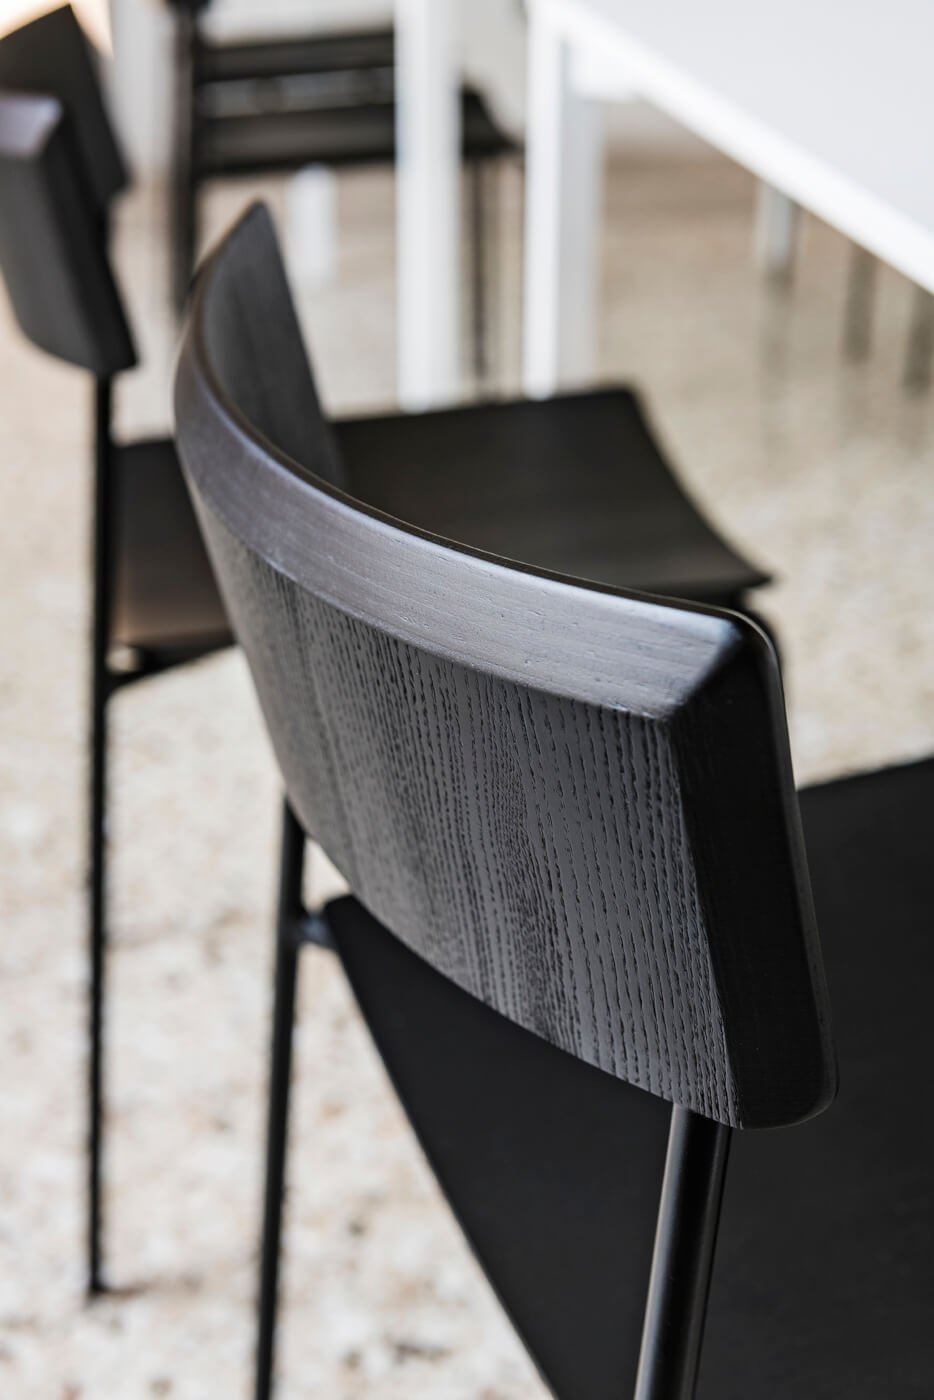 Mito S M LG Chair from Midj, designed by Midj R&D